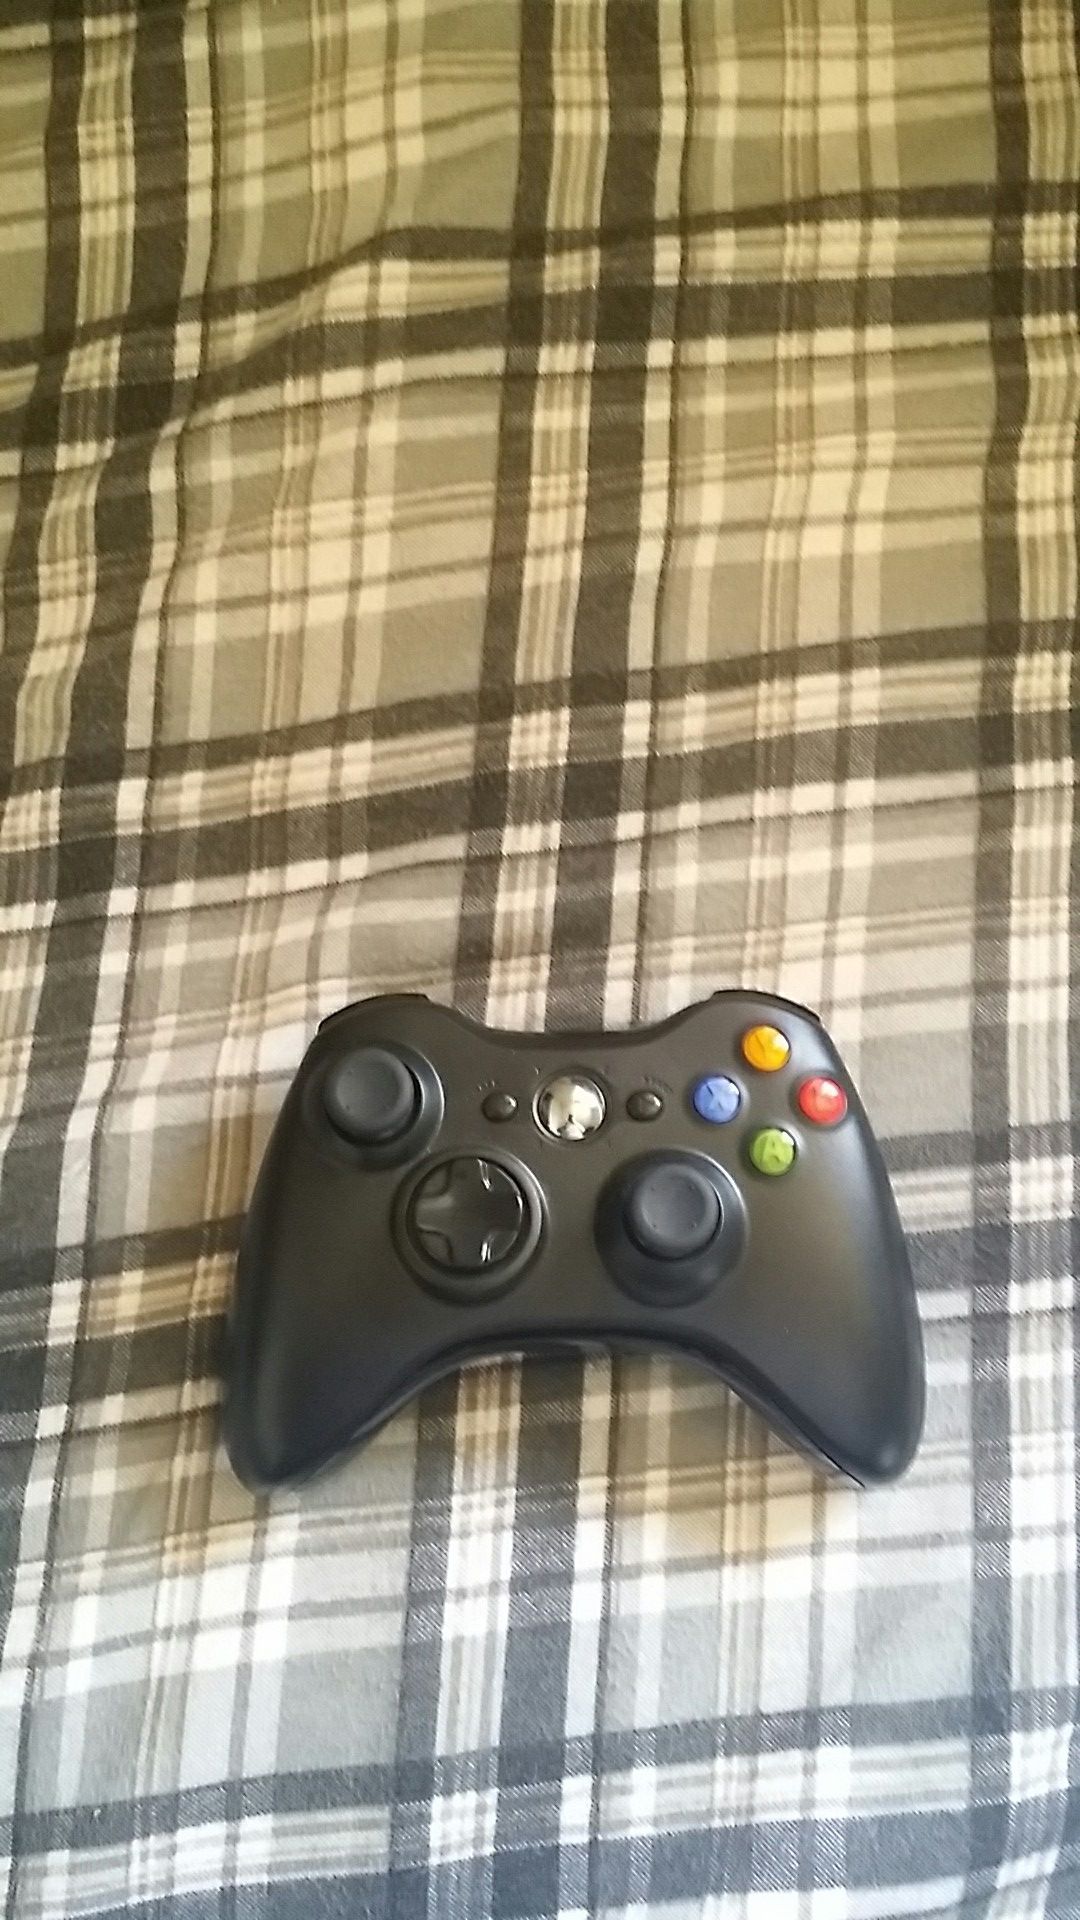 A well kept xbox controller with a 2.4g wirless gaming receiver and a pack of Duracell.